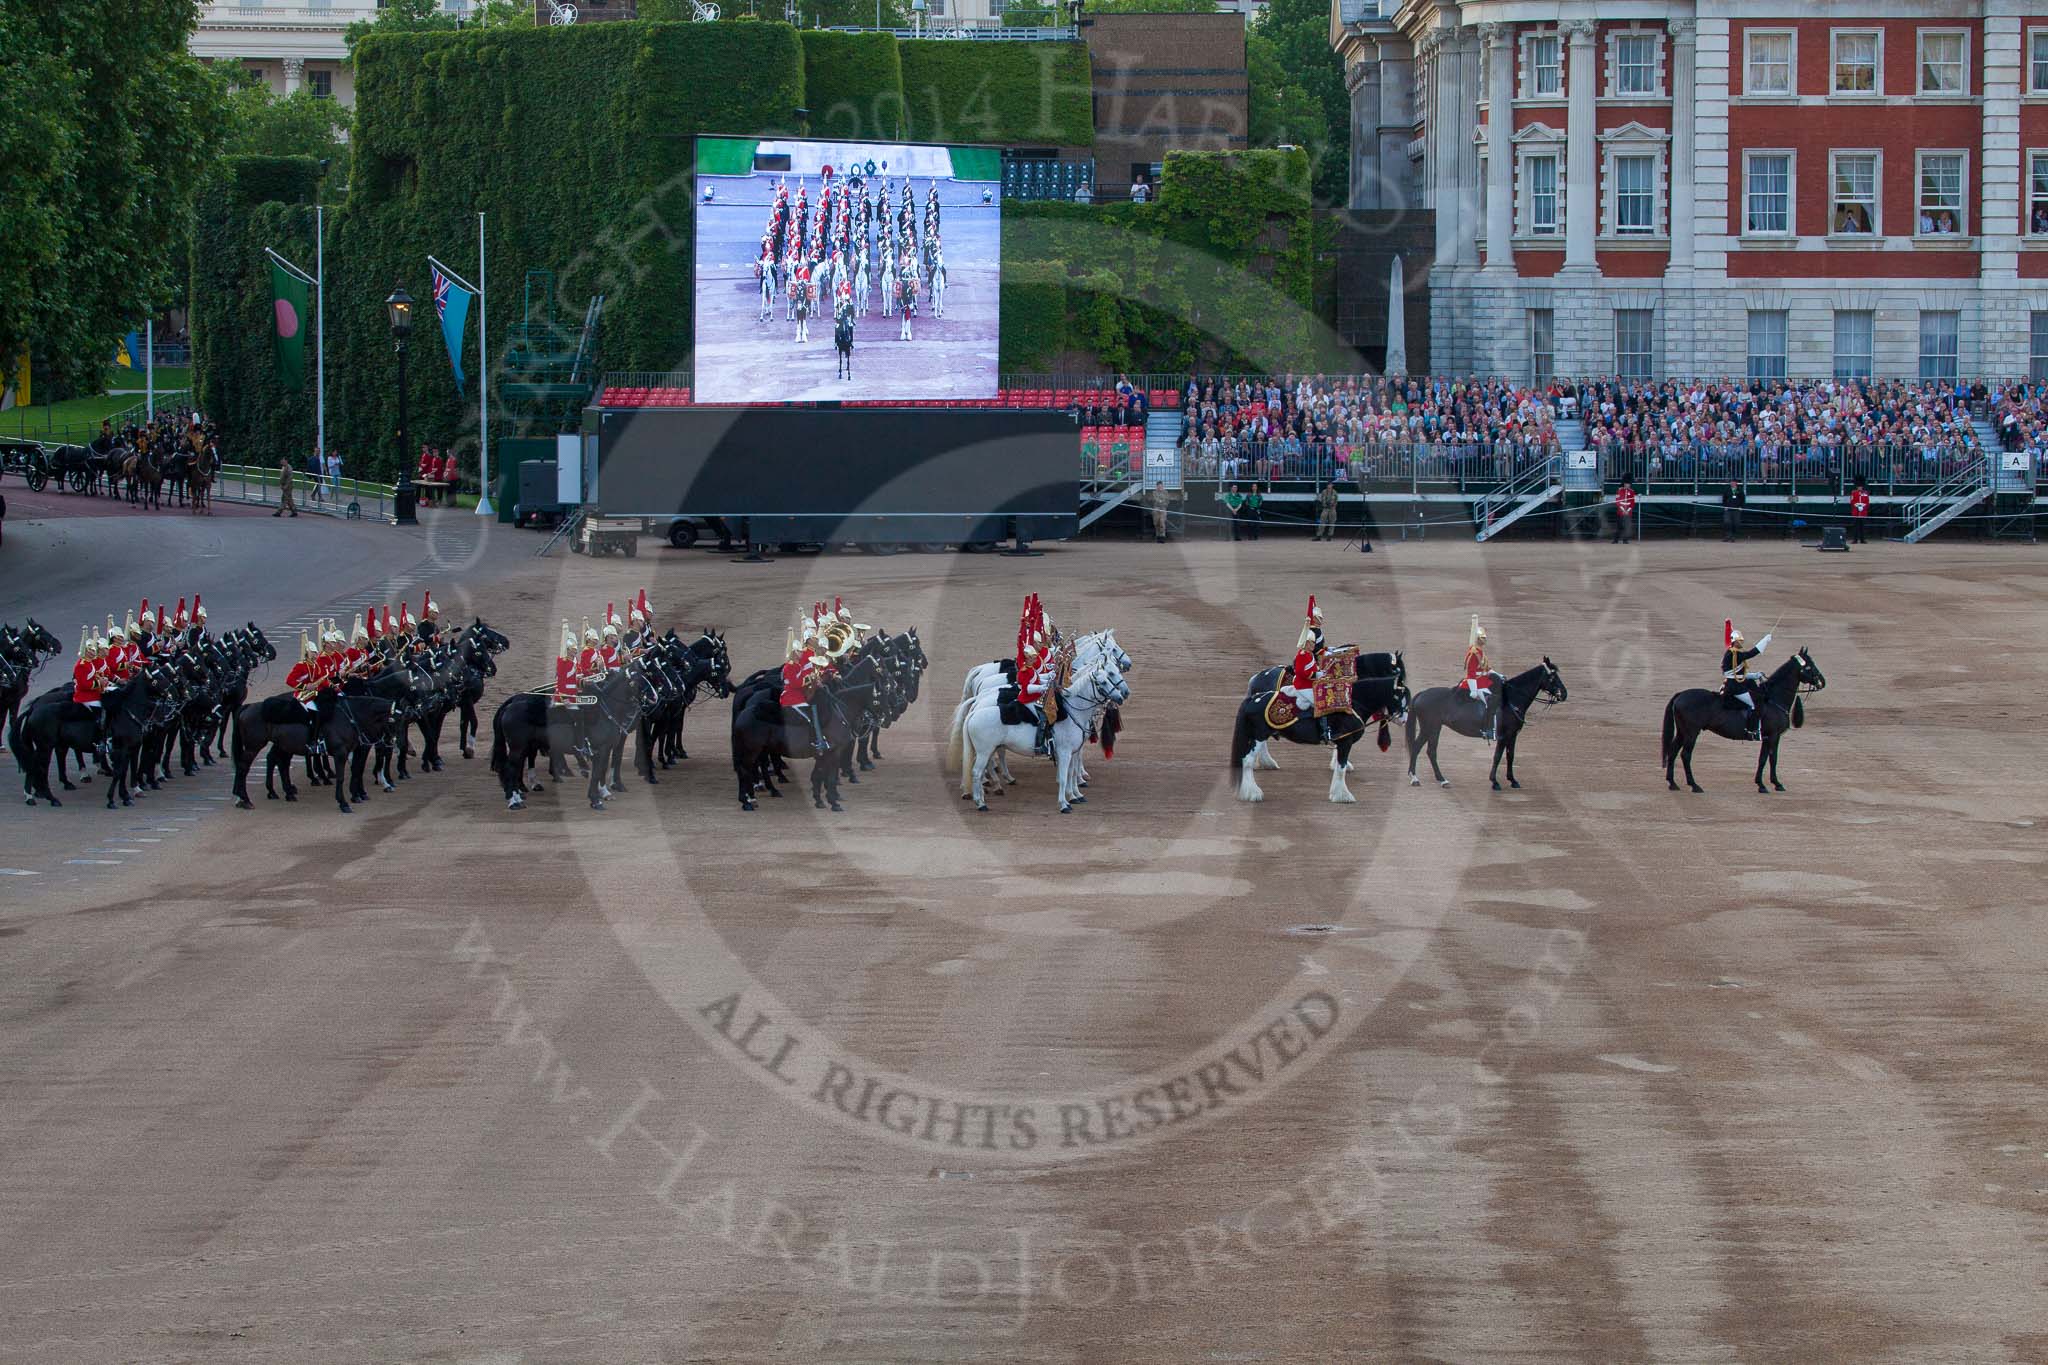 Beating Retreat 2014.
Horse Guards Parade, Westminster,
London SW1A,

United Kingdom,
on 11 June 2014 at 20:42, image #174